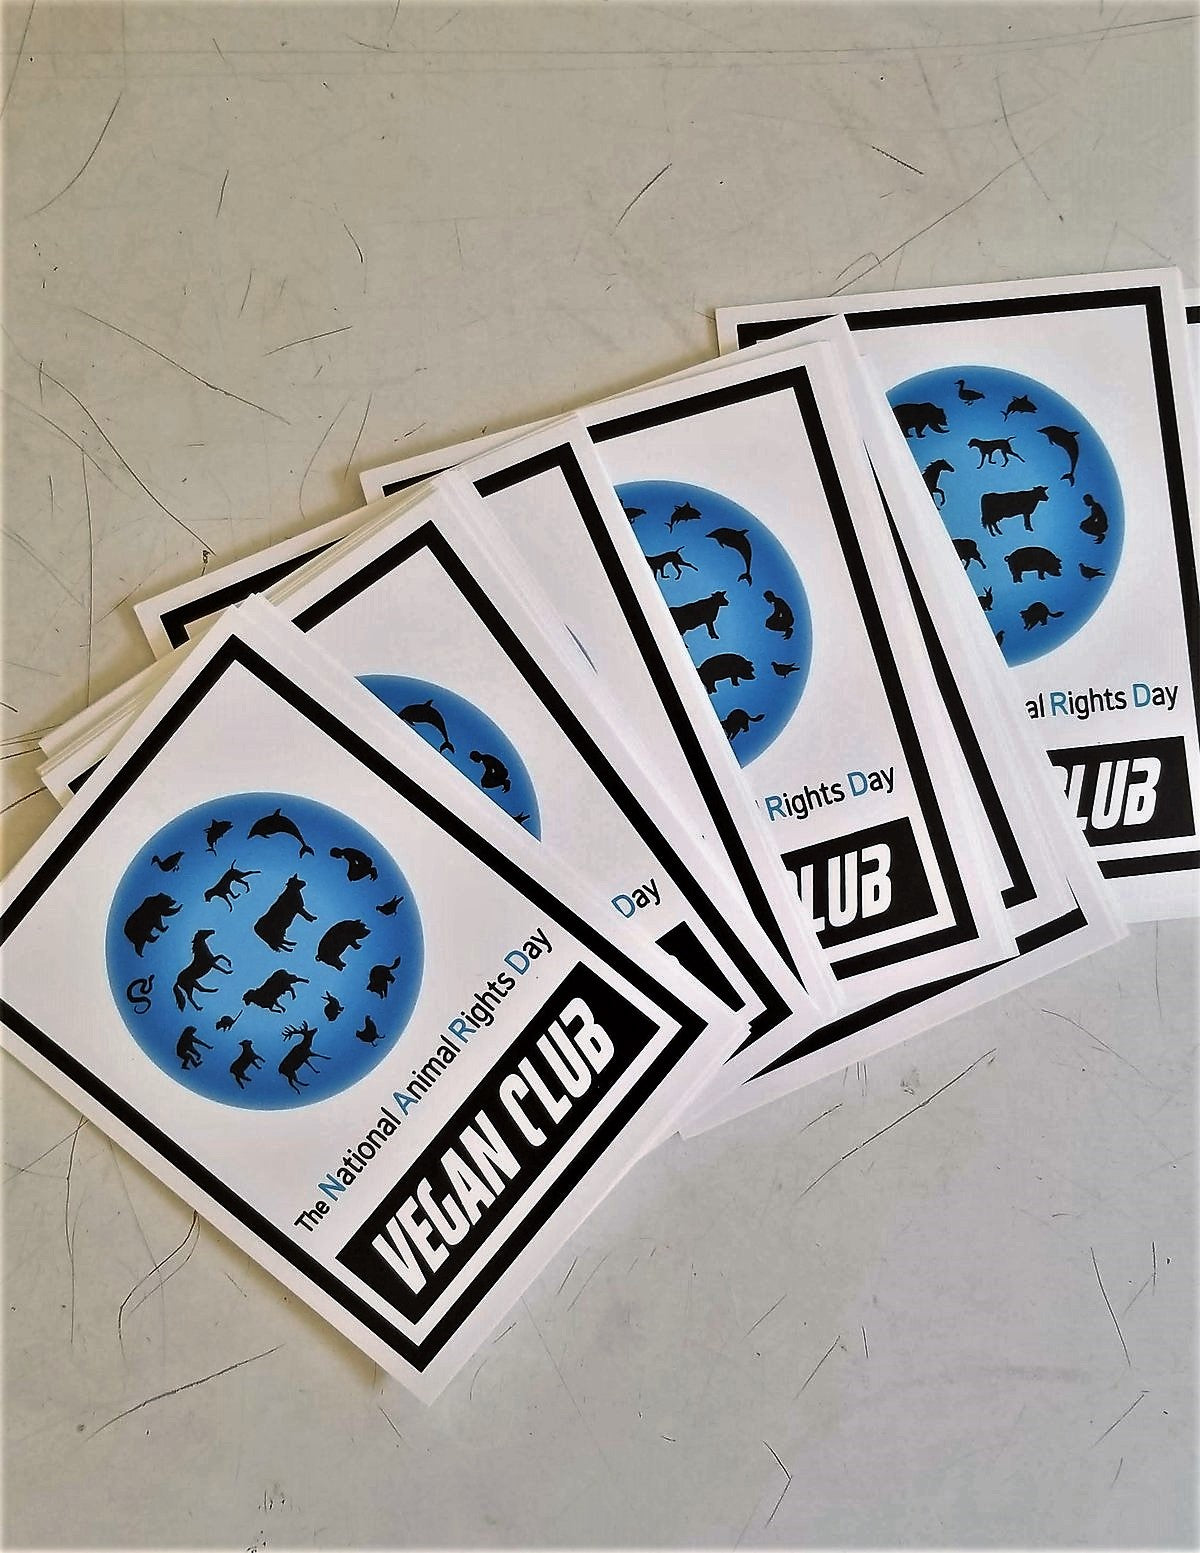 SOLD OUT - 12 Vegan Club NARD National Animal Rights Day Stickers